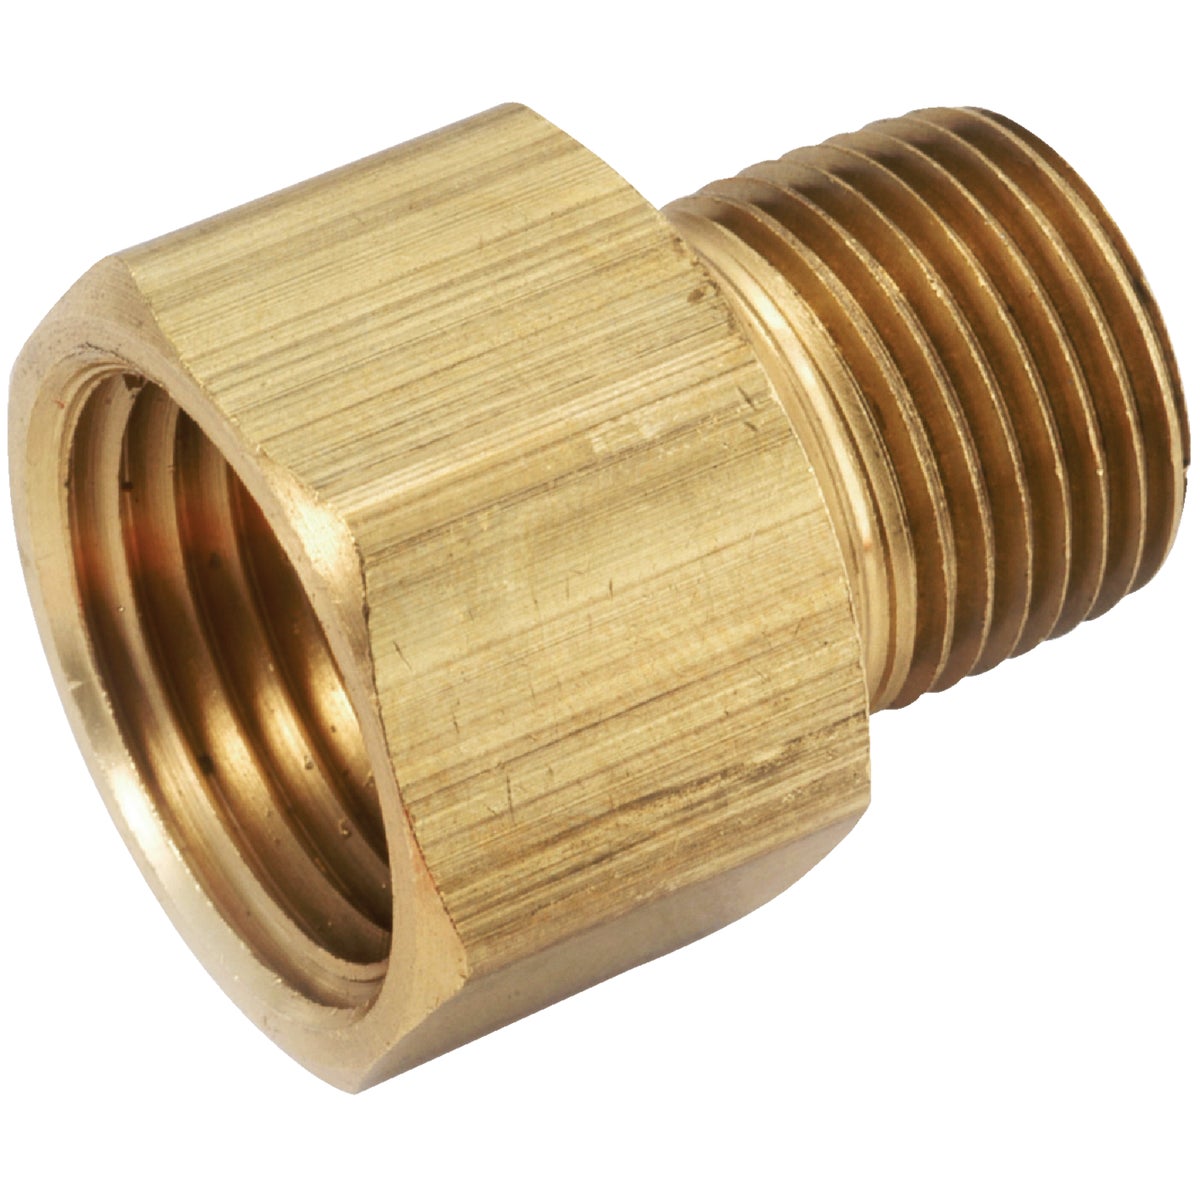 Anderson Metals 1/4 In. FPT x 1/4 In. MPT Brass Adapter